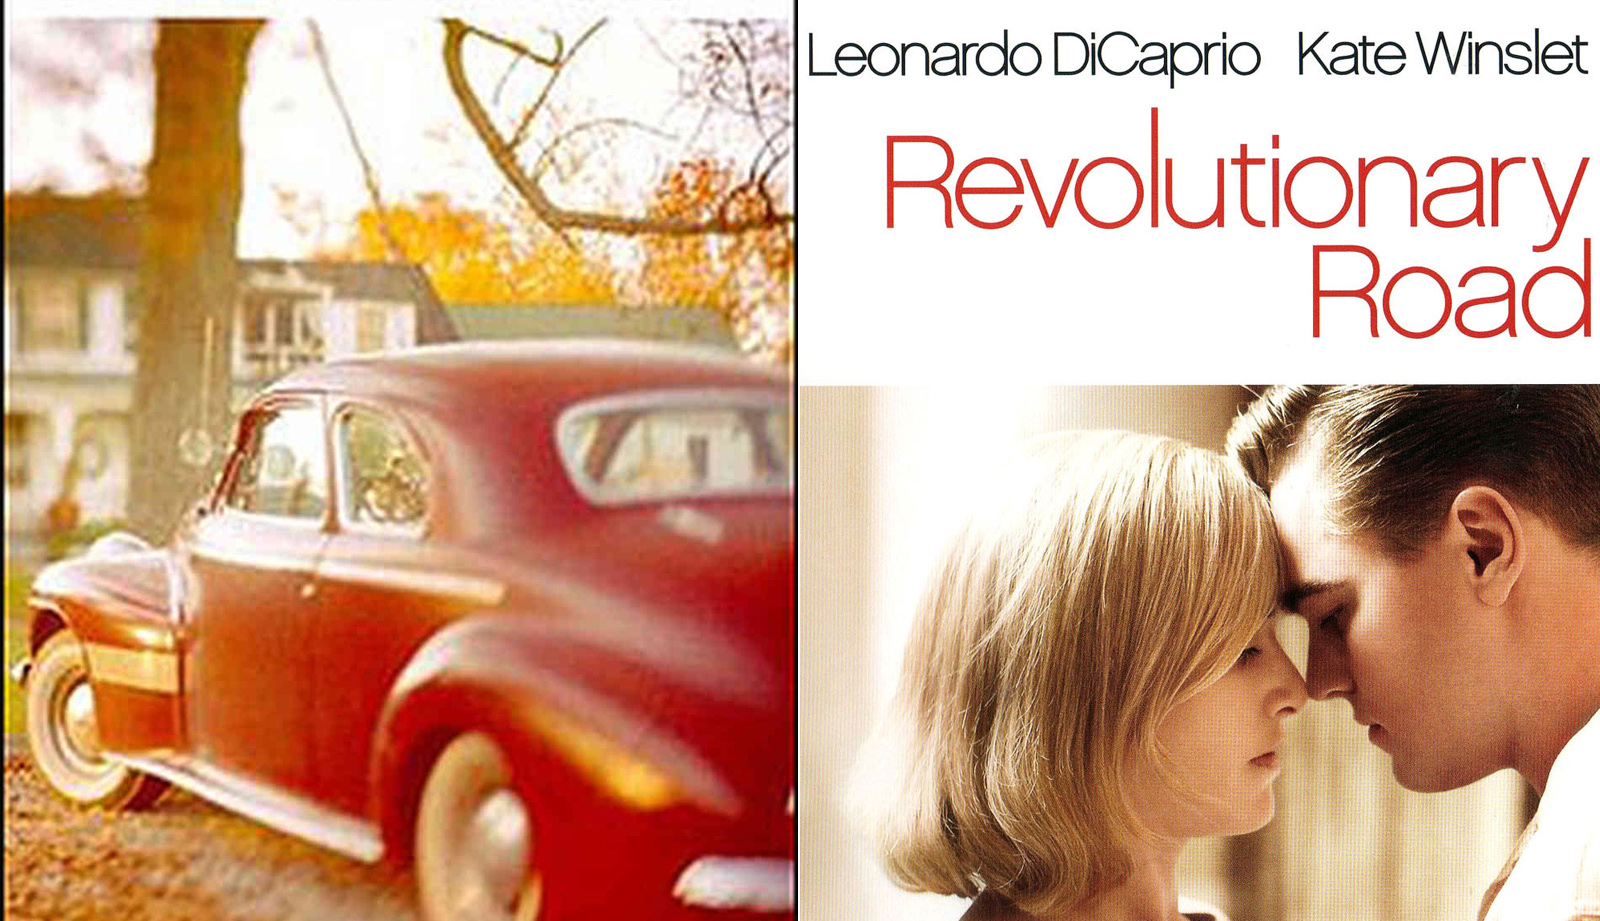 Book-to-movie cover of Revolutionary Road featuring Leonardo DiCaprio and Kate Winslet. On the left is a red old-fashioned car and on the right the two actors share an intimate pose.